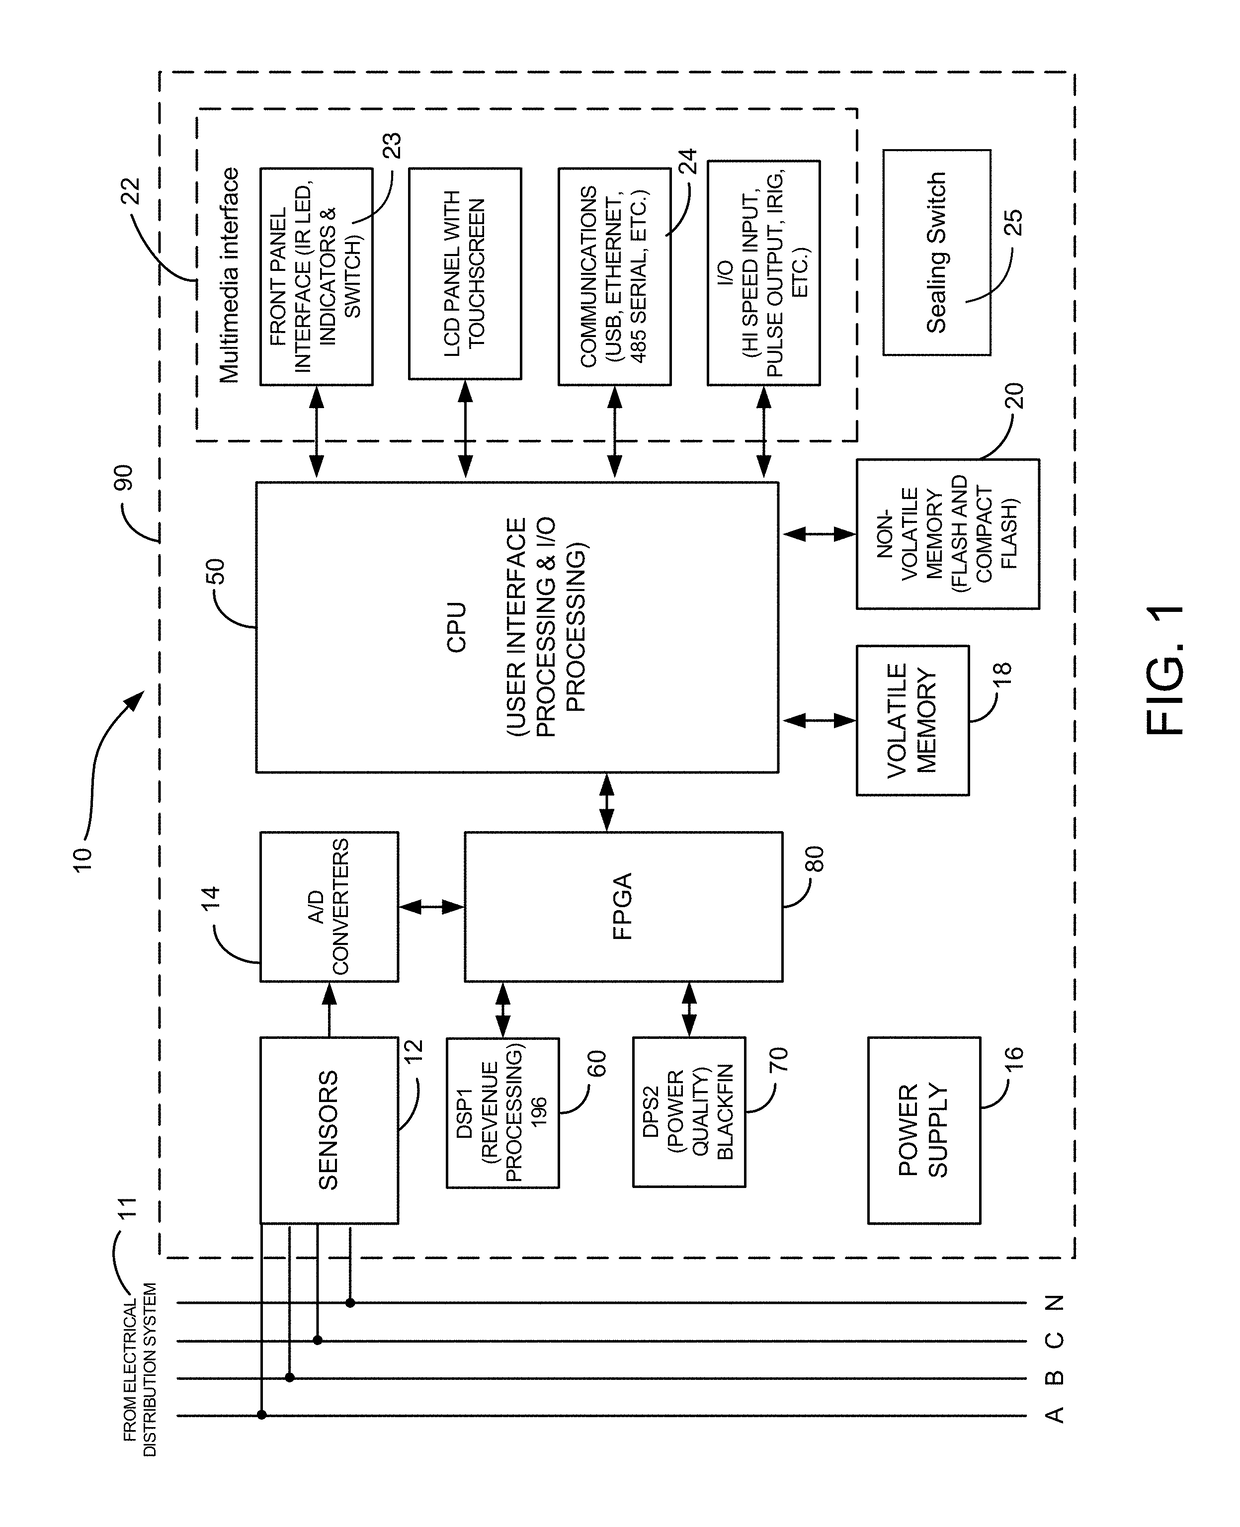 Providing security in an intelligent electronic device